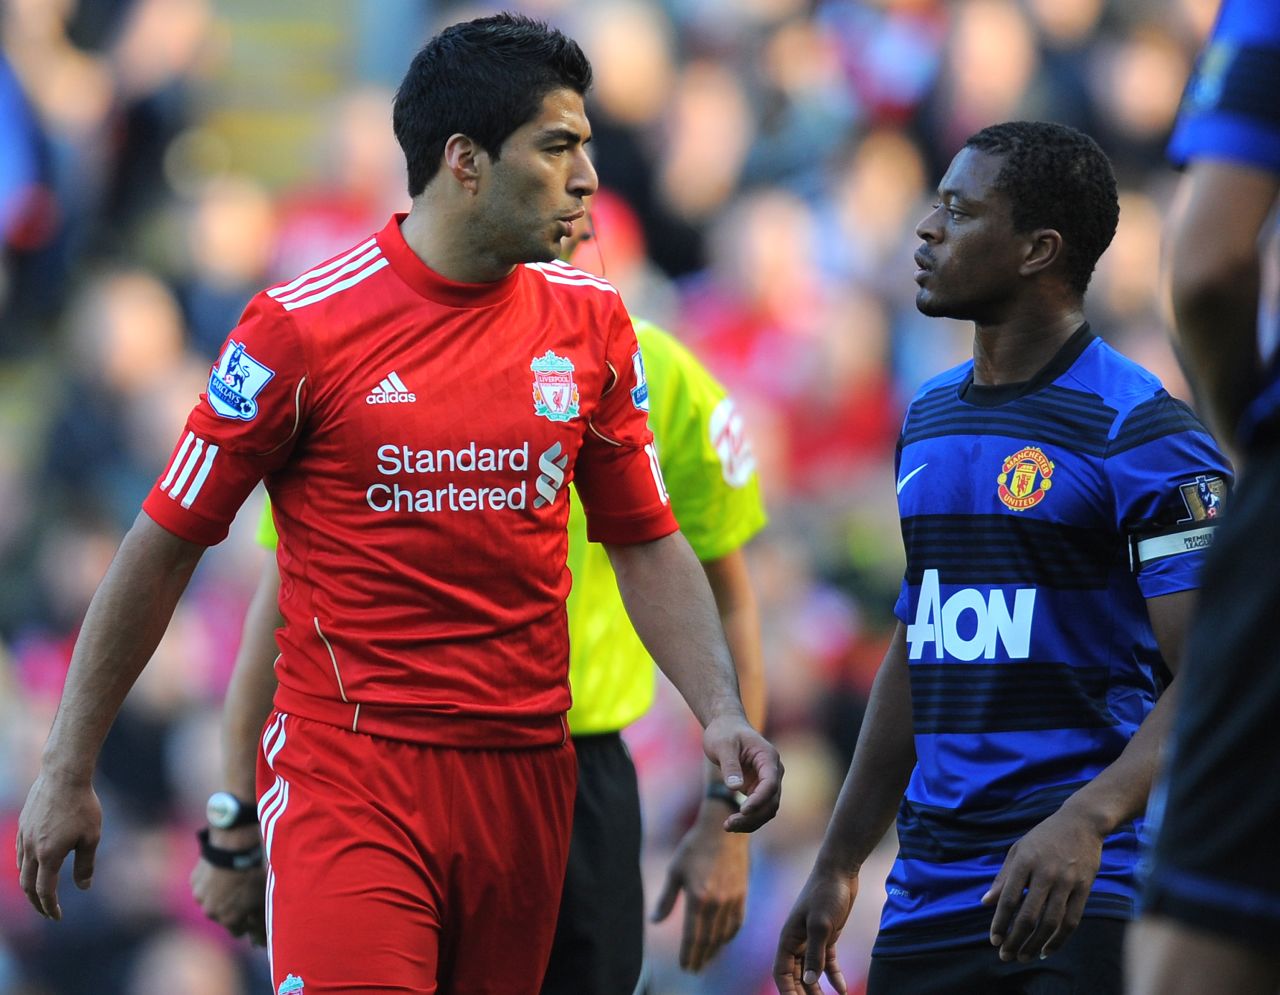 After his move to Liverpool in 2011, Suarez, left, was found guilty of racially abusing Manchester United's Patrice Evra and was fined $63,000 and banned for eight matches.